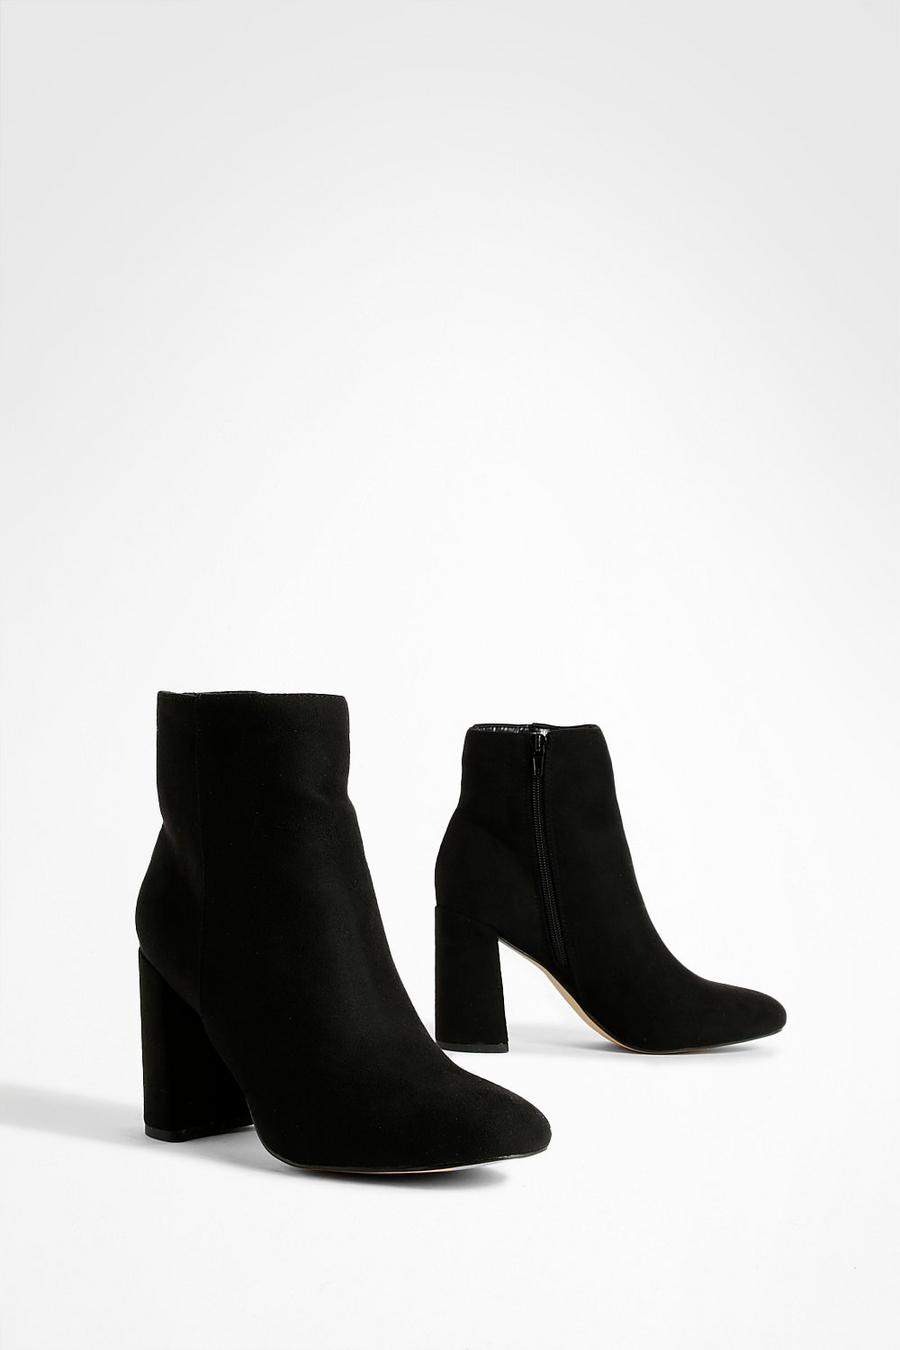 Black Round Toe Block Heel Faux Suede Ankle Boots image number 1